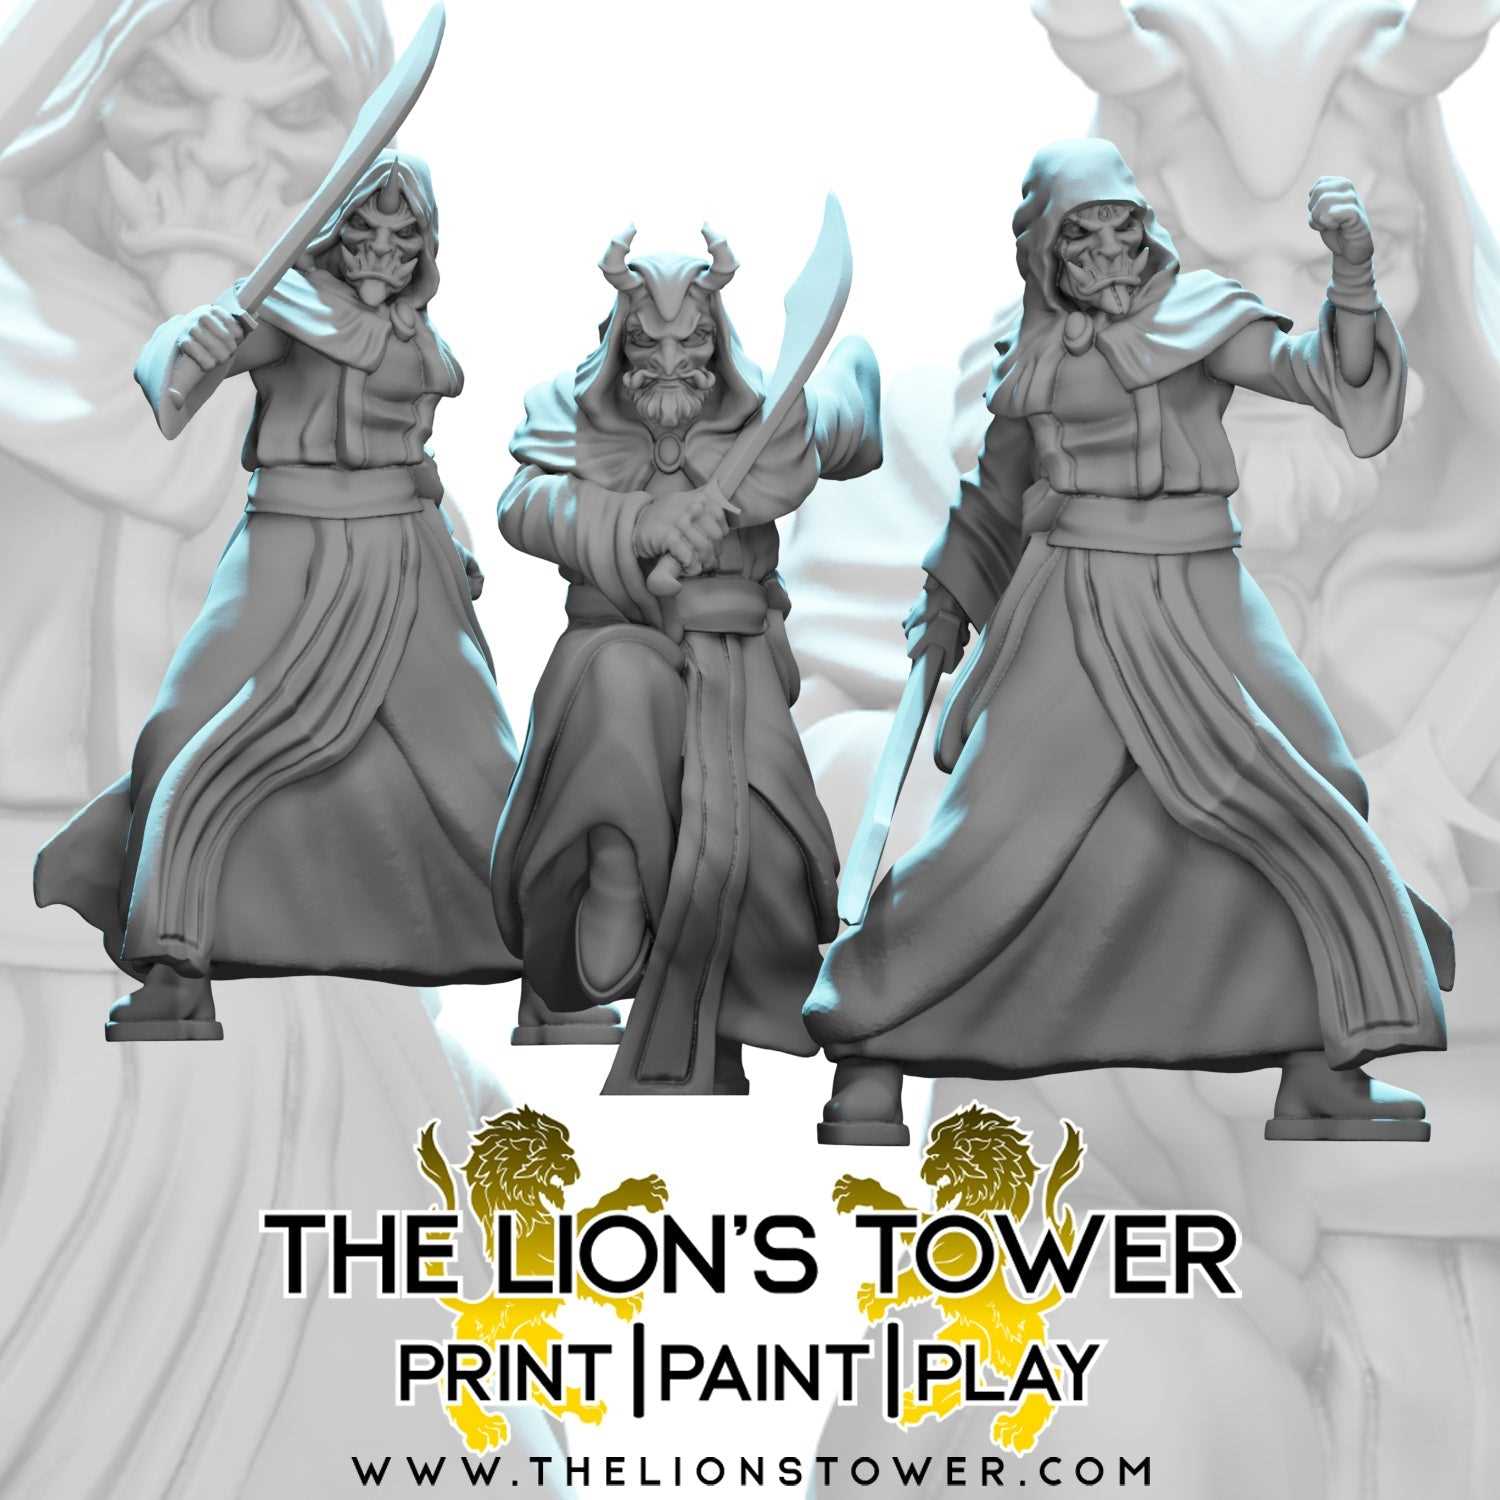 Golden Masked Cultists - Attacking (Set of 3 x 32mm scale resin miniatures with MDF bases)